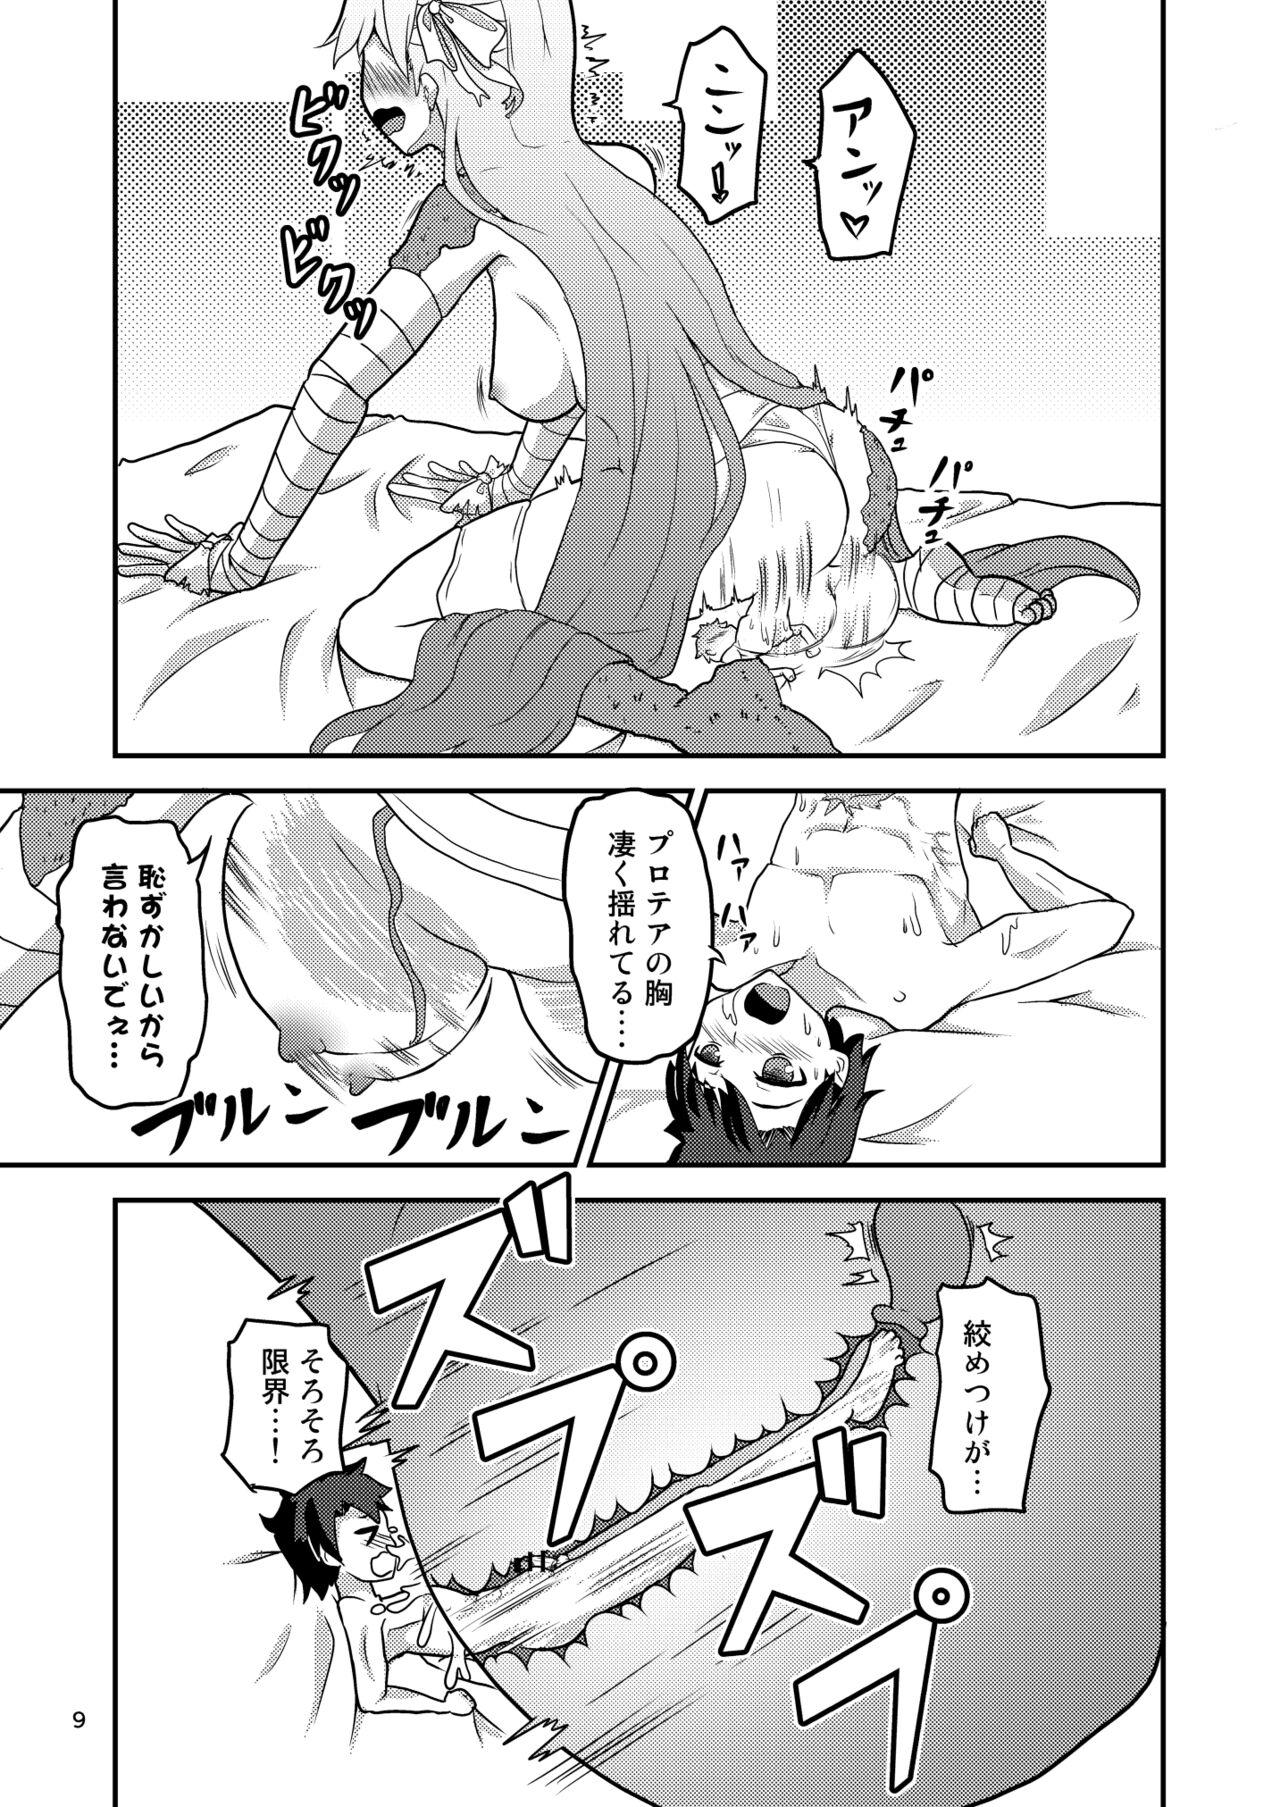 Ametuer Porn Hな私をゆるしてください - Fate grand order Toy - Page 10